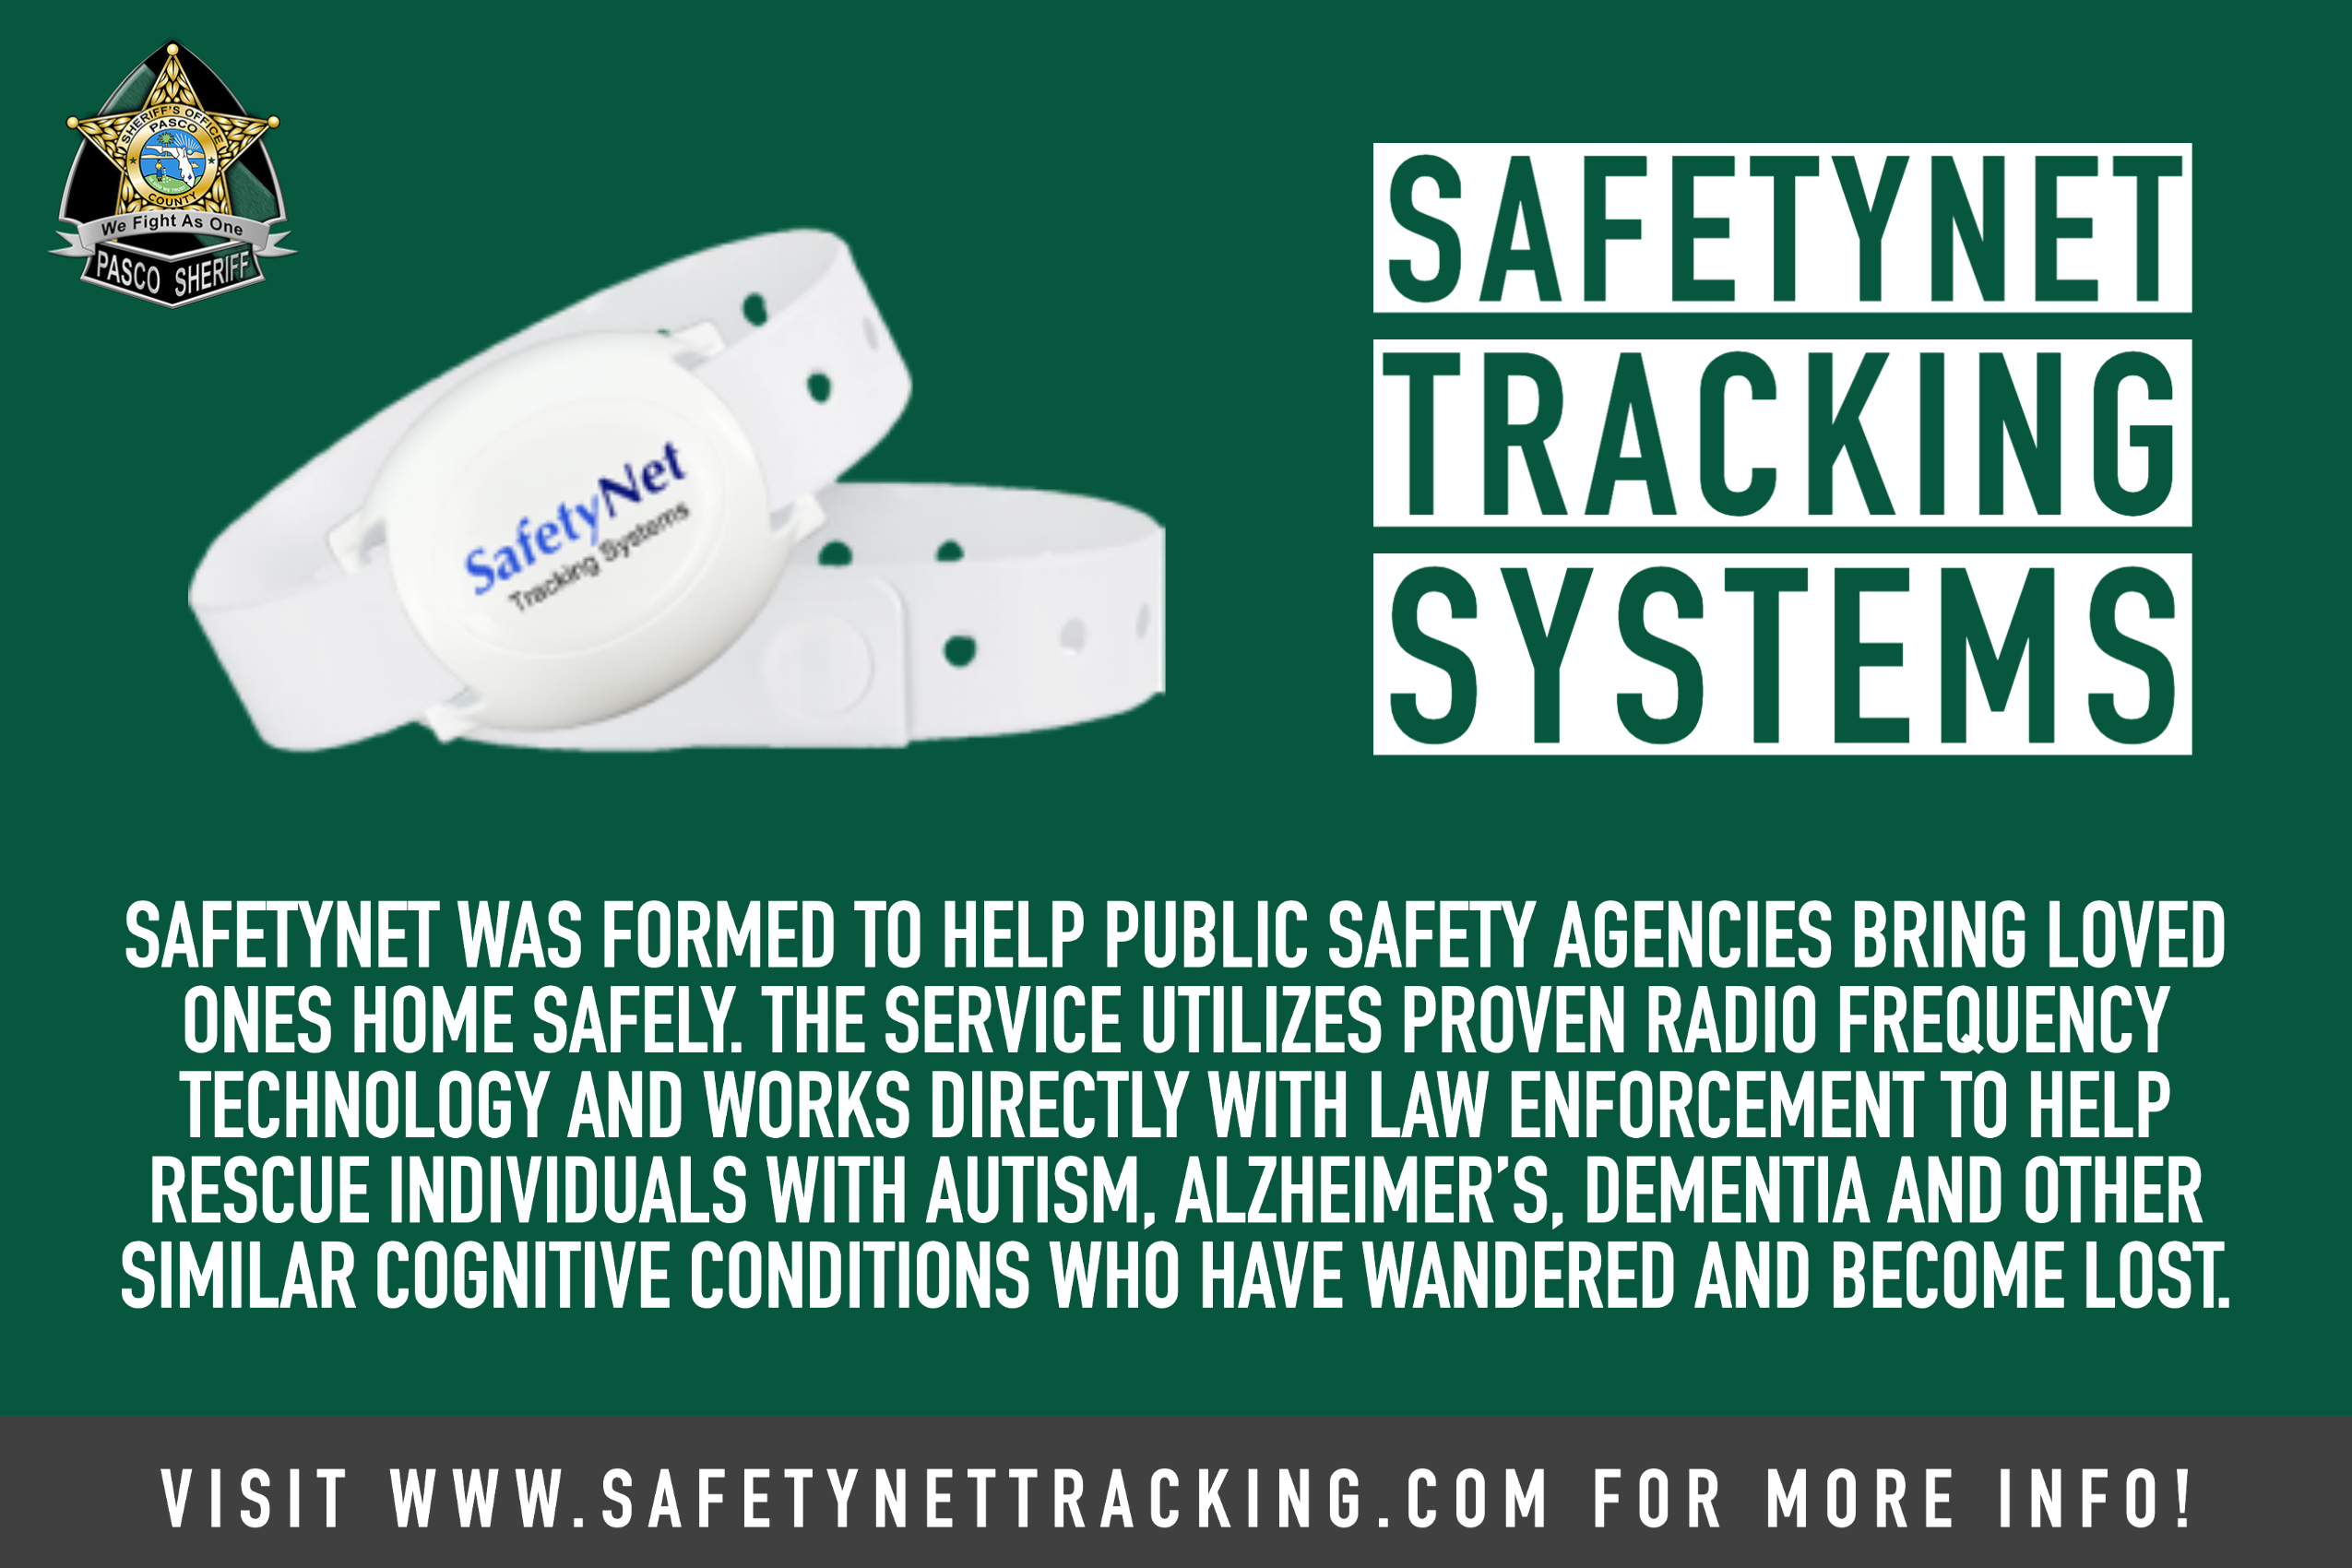 Safety net tracking systems